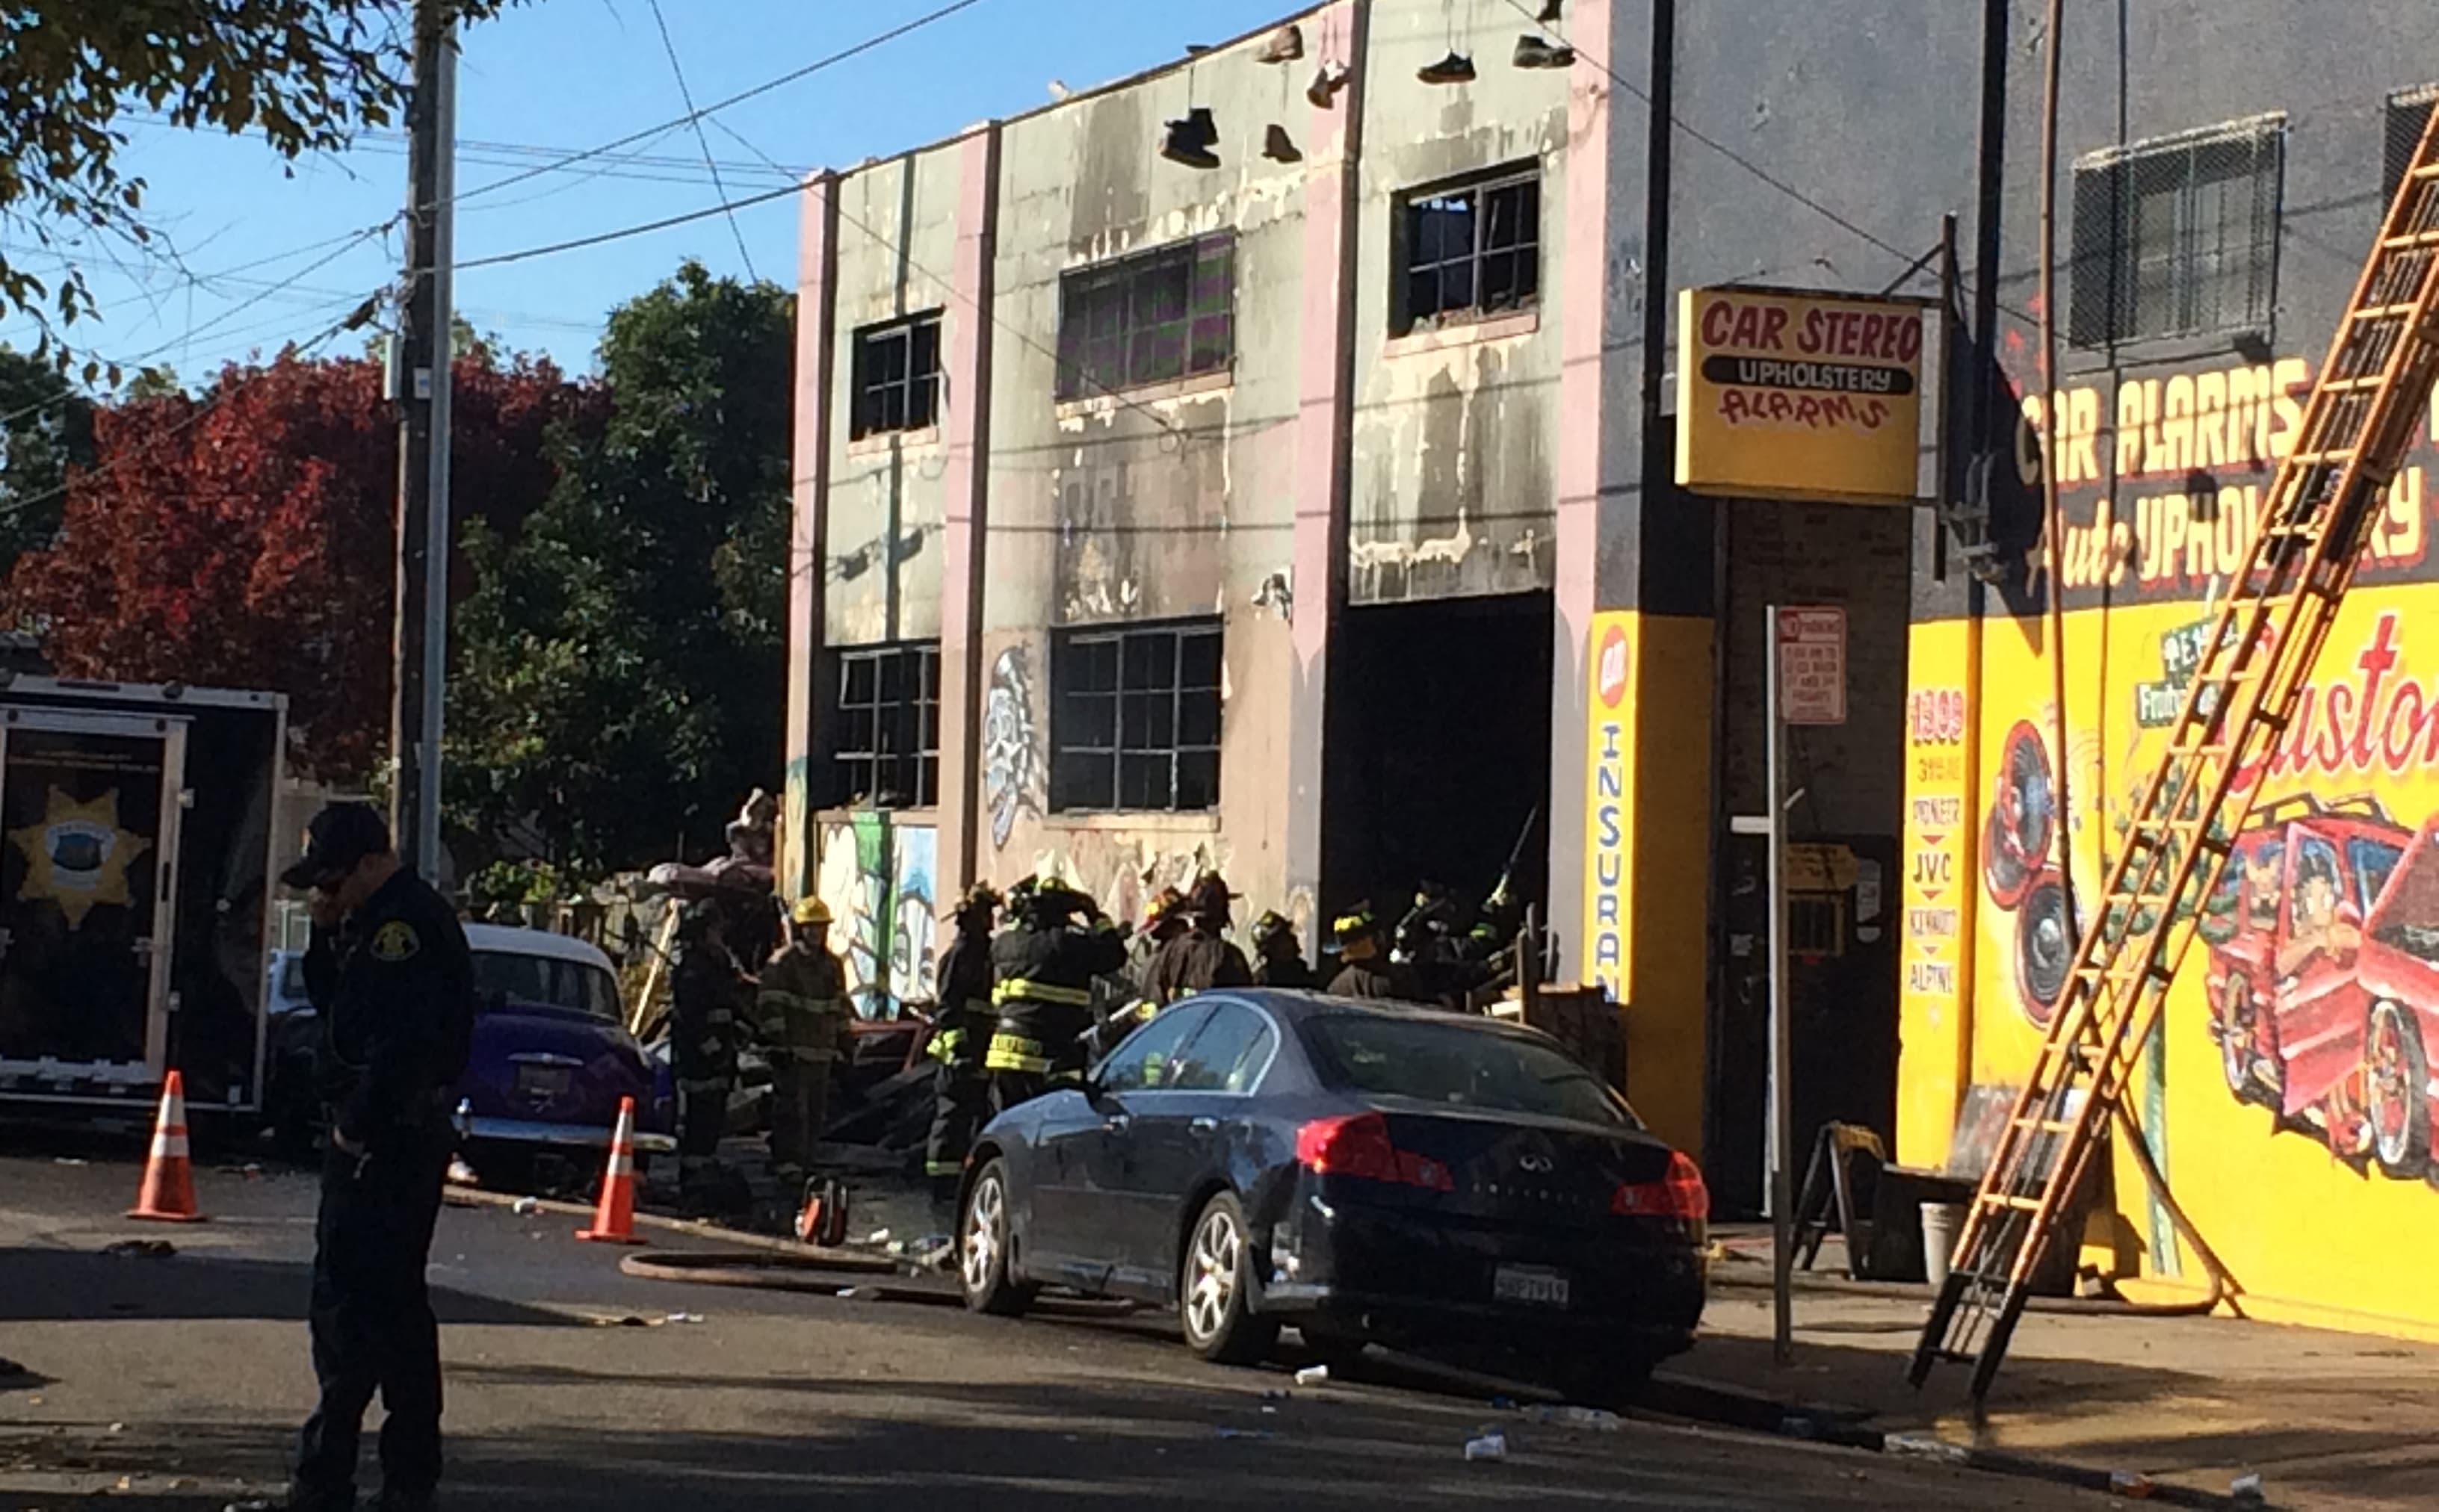 Firefighters inspect the warehouse in the Fruitvale district after the fire which killed at least nine people.